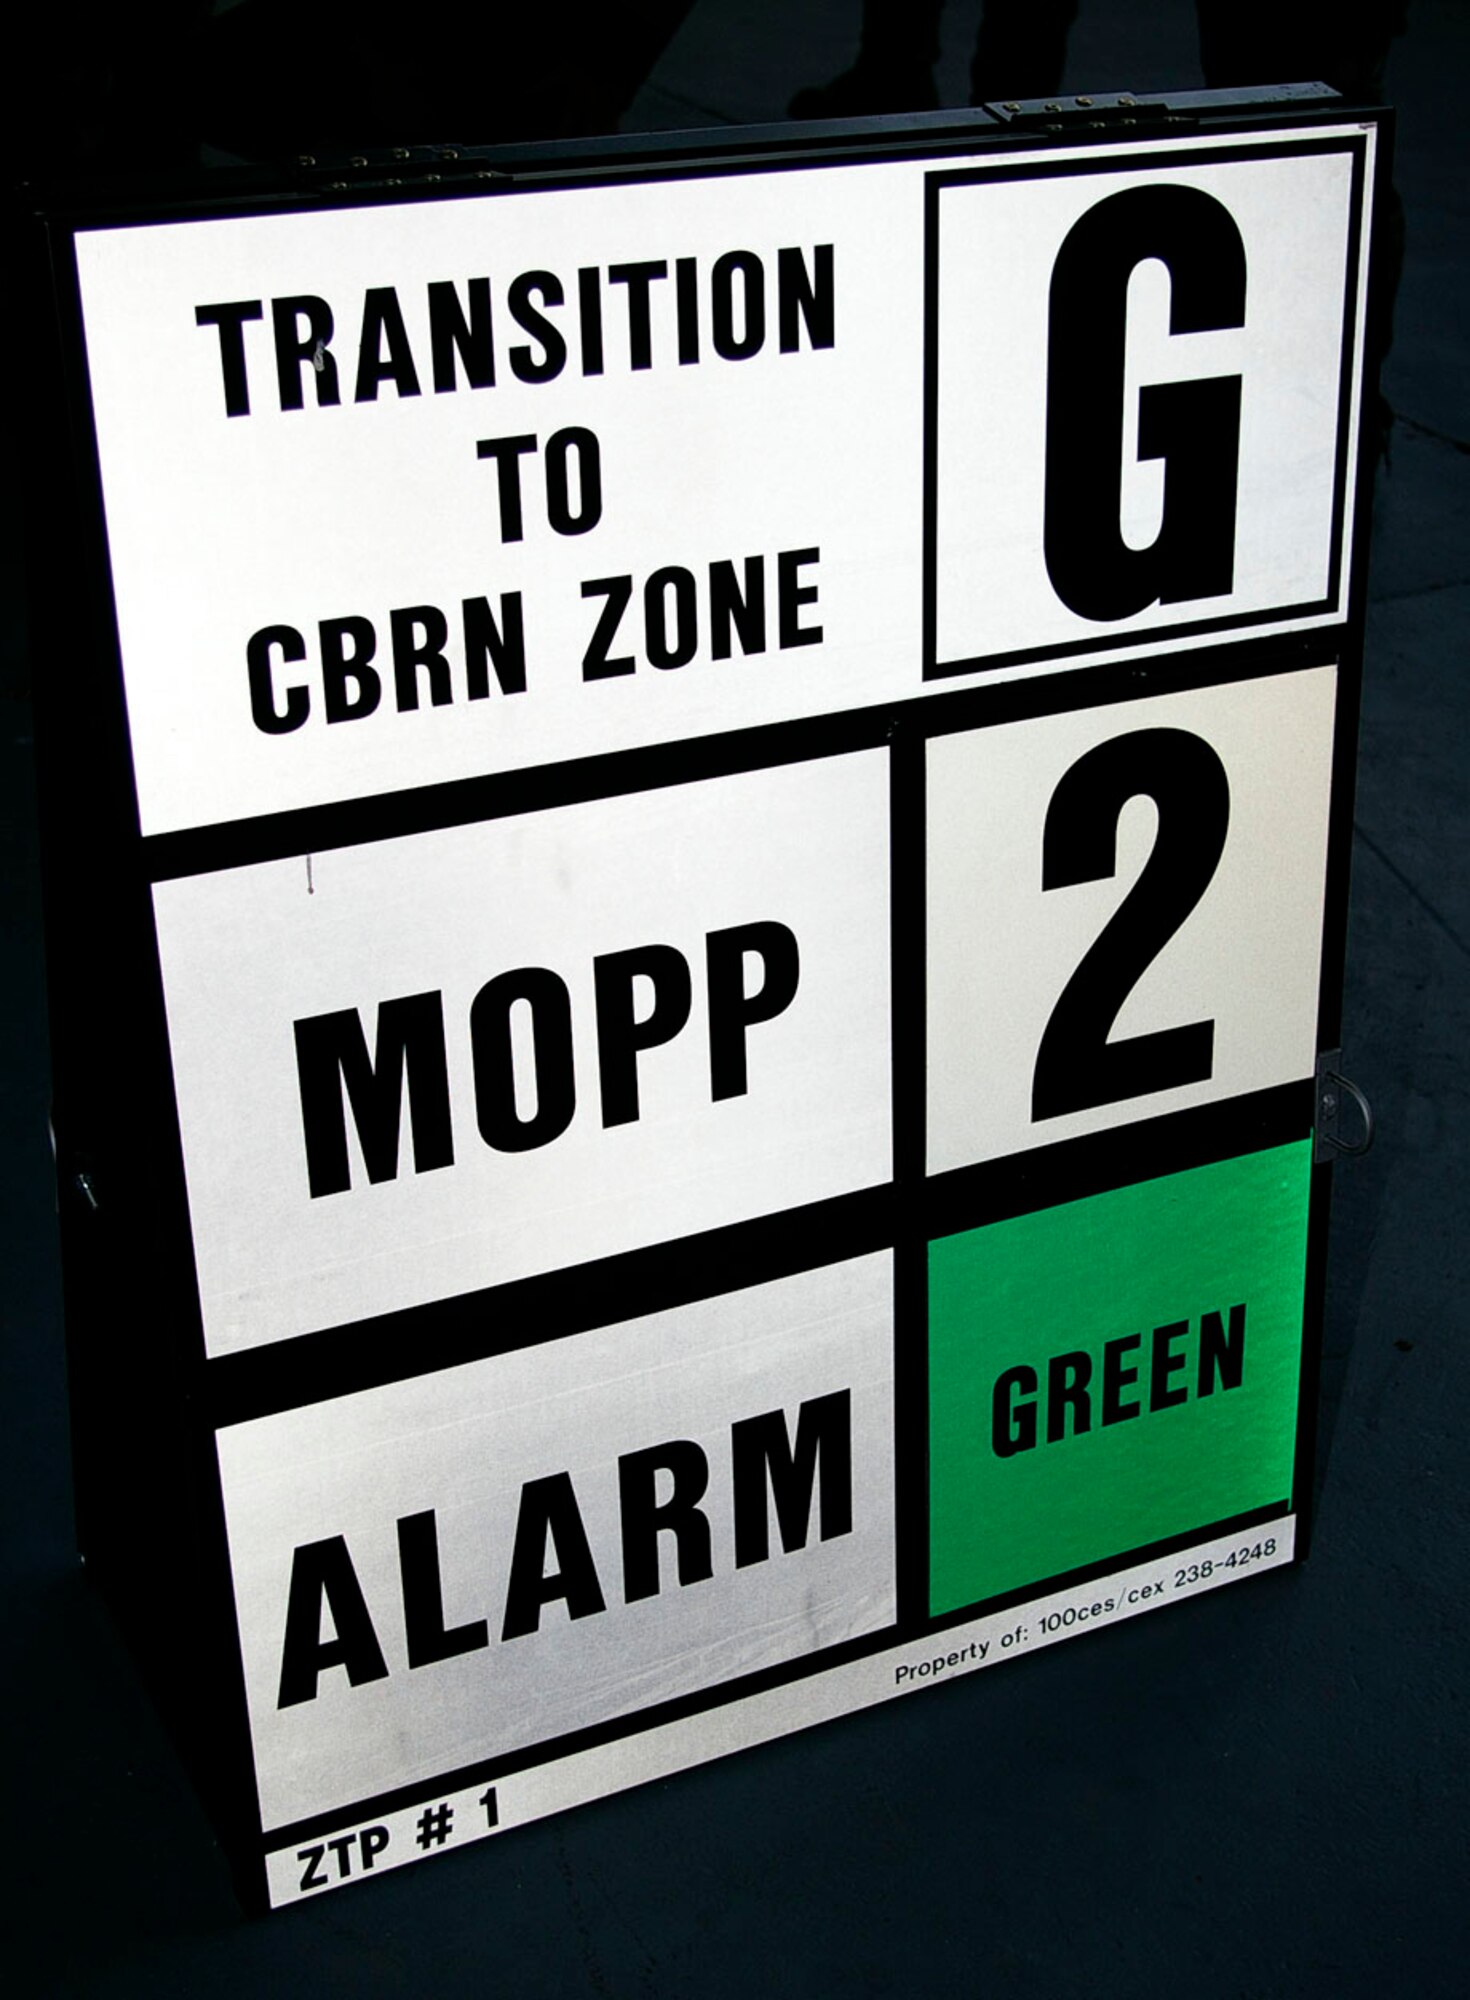 This board shows Alarm and MOPP conditions and is used when students perform practical training as part of Chemical, Biological, Radiological and Nuclear Defense training at Building 562. (U.S. Air Force photo by Karen Abeyasekere) 